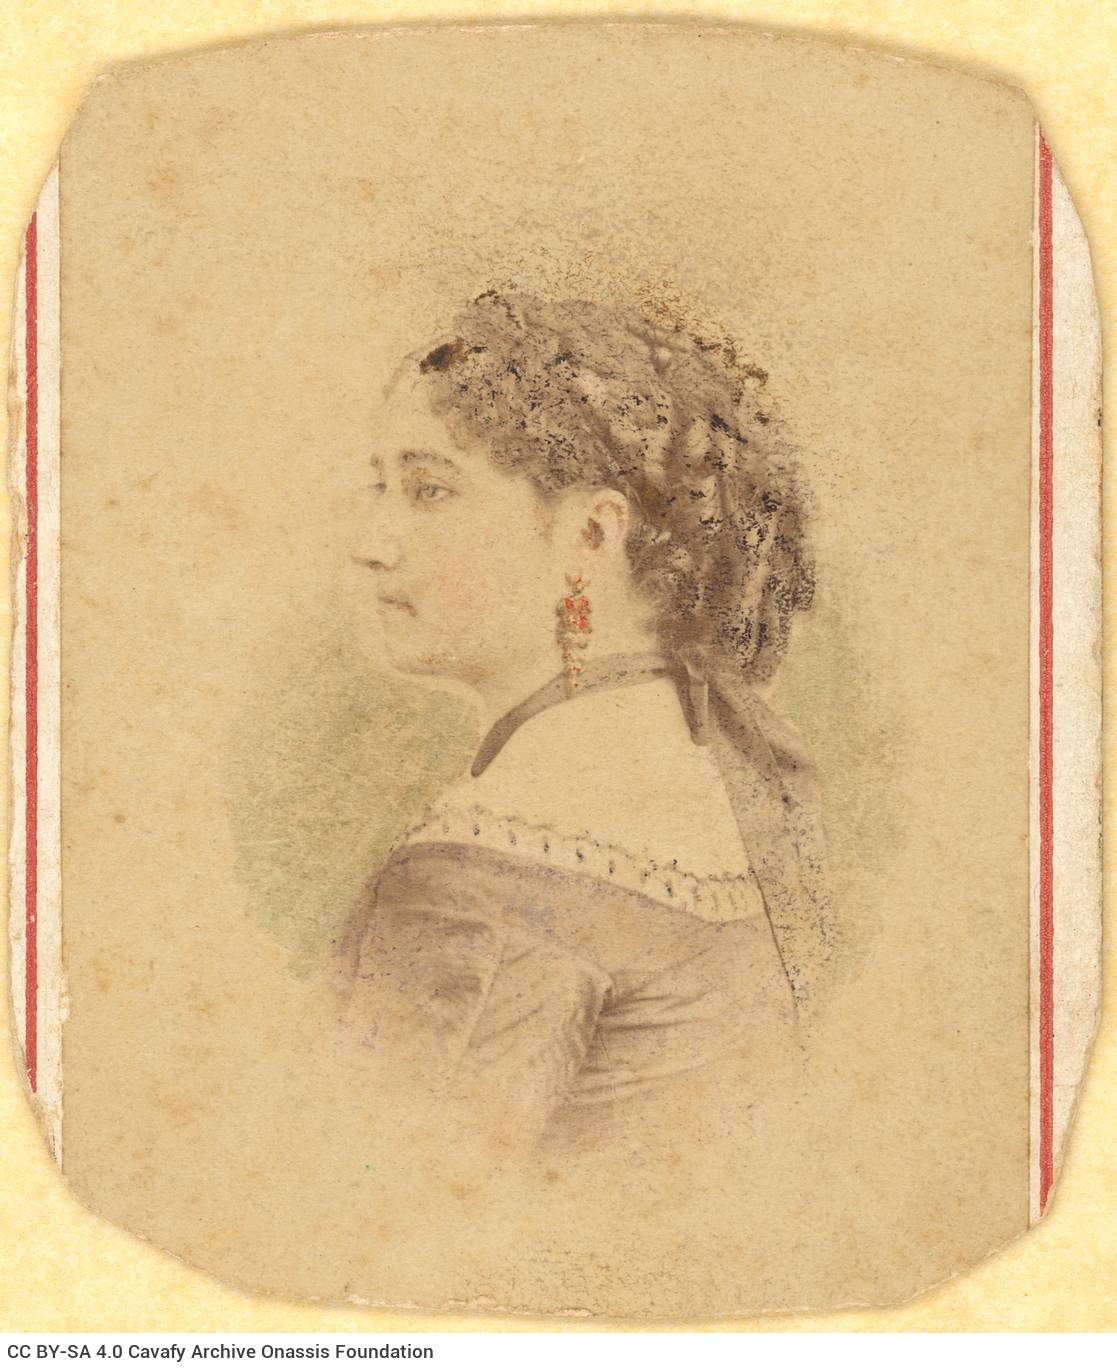 Hand-coloured photograph of Charikleia Cavafy at a young age. She is depicted in profile view, wearing her hair in an artful 